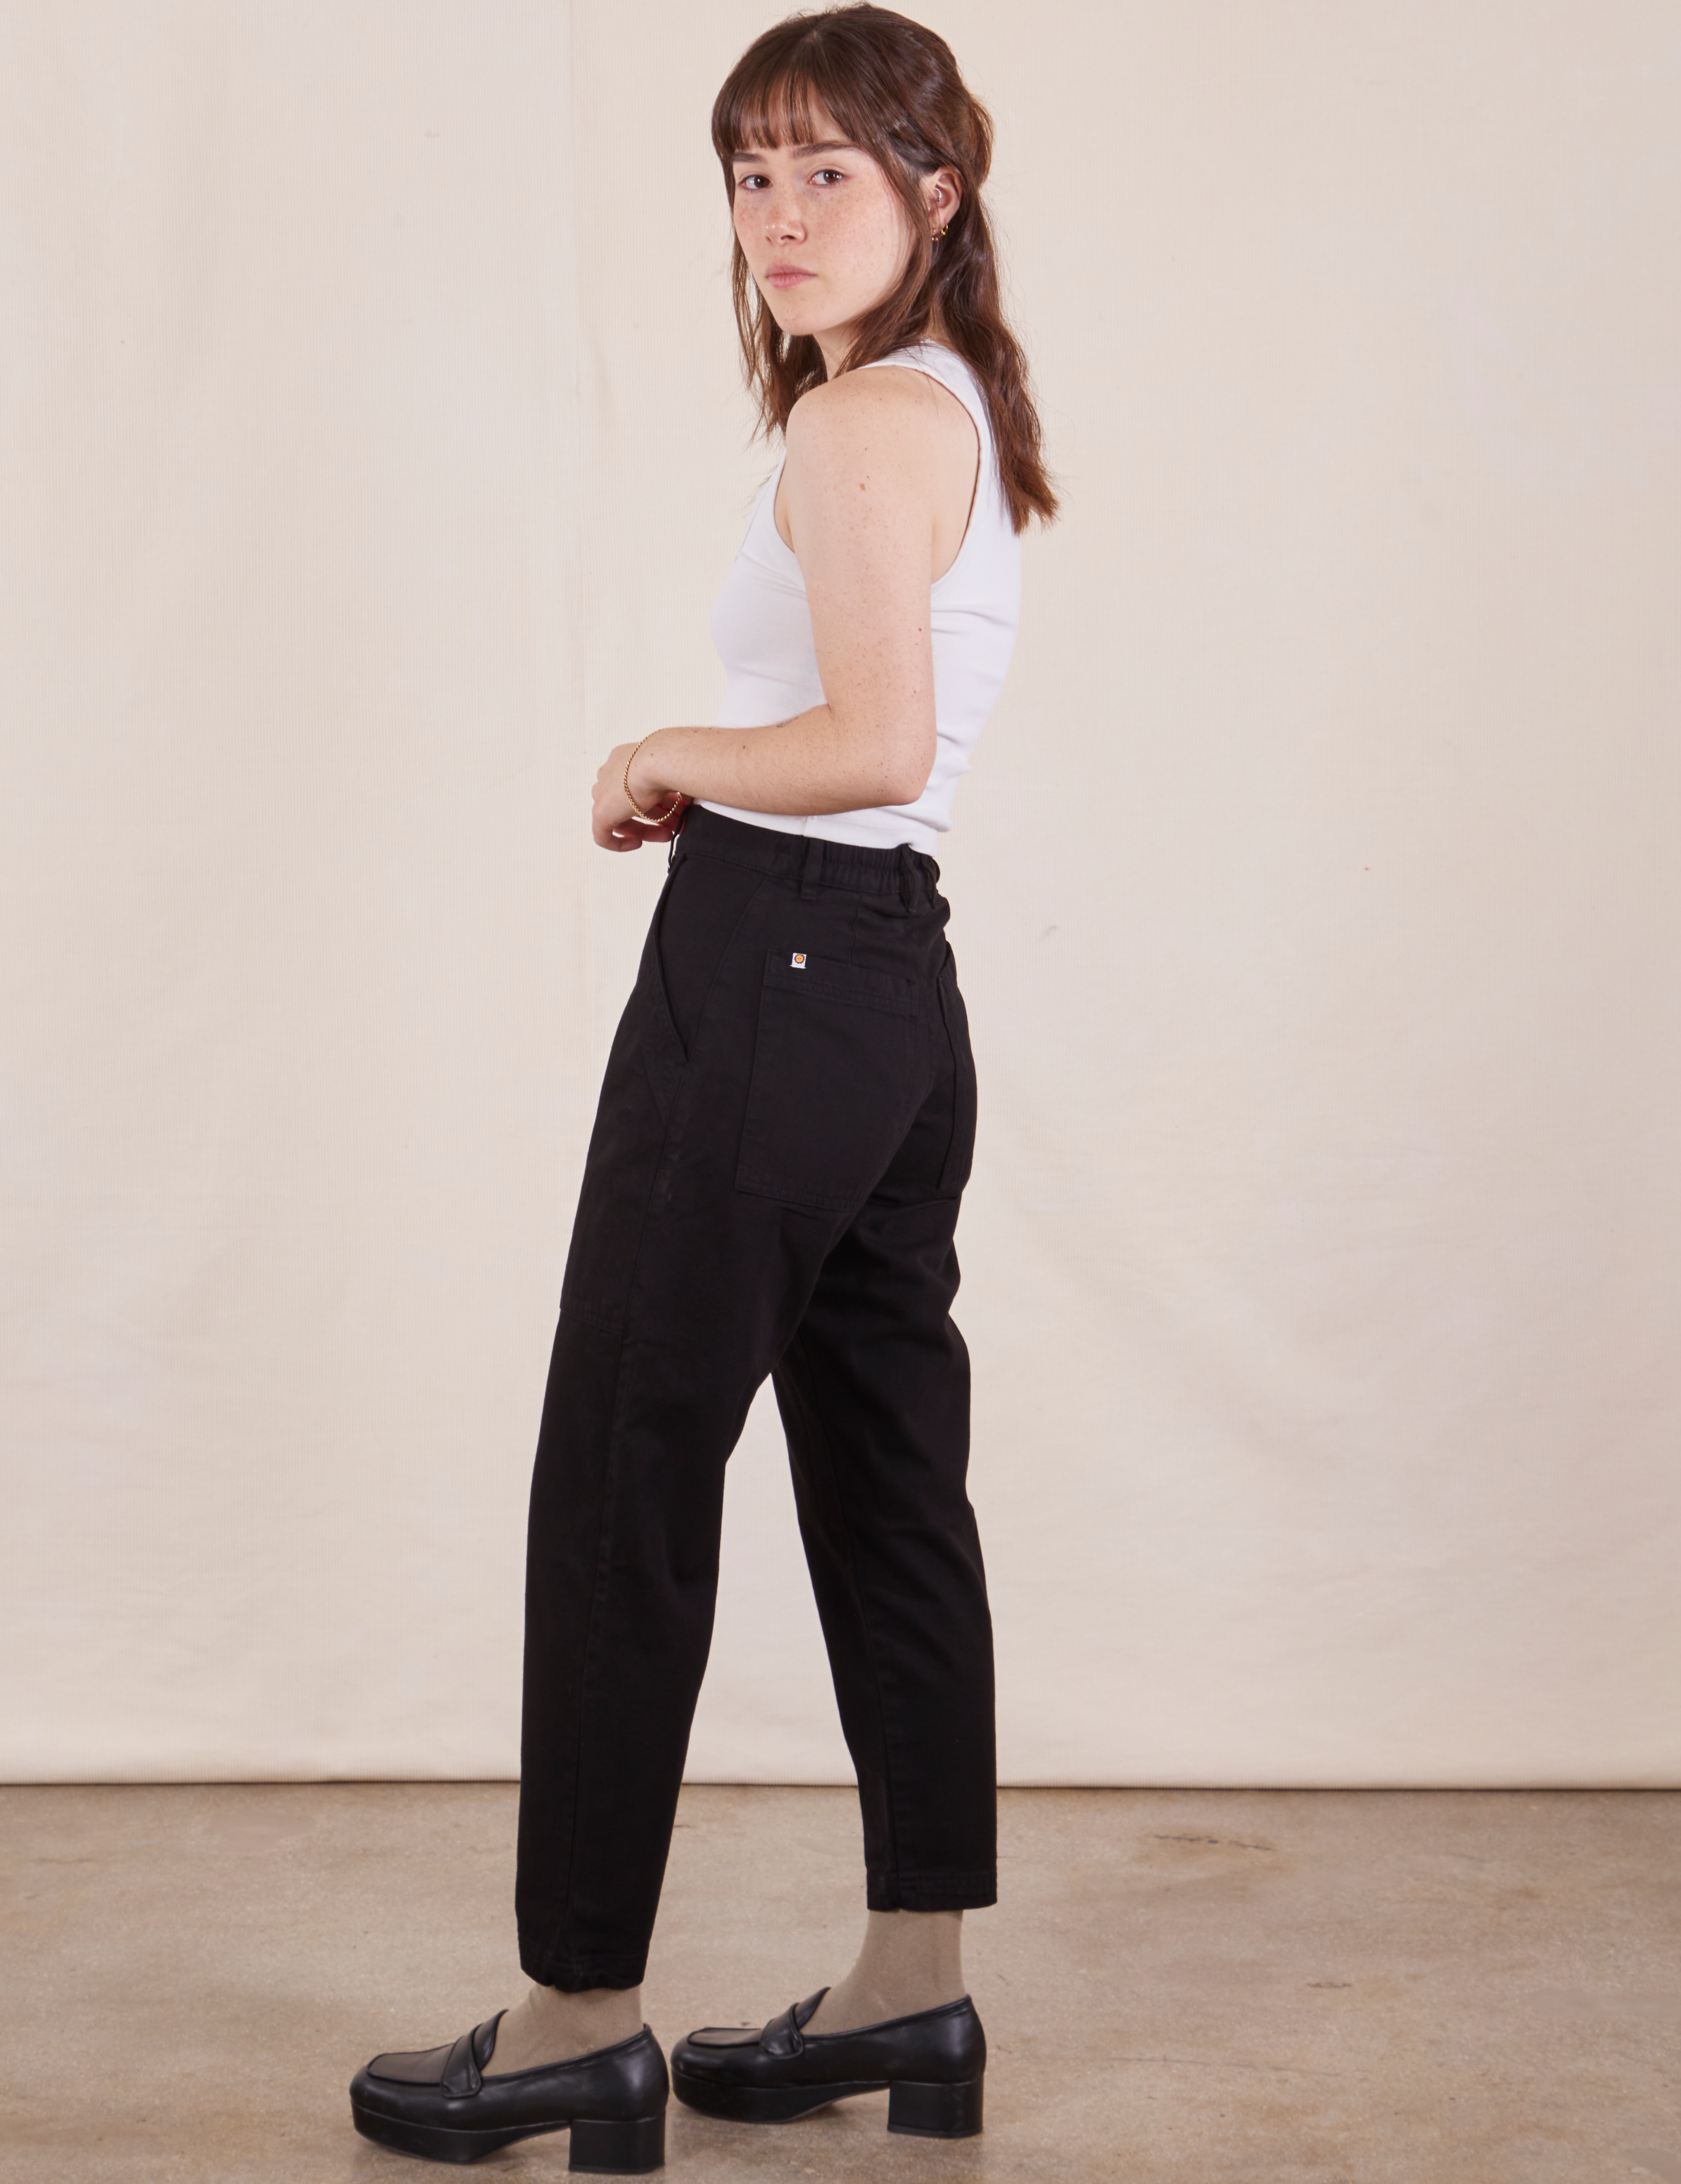 Side view of Petite Pencil Pants in Basic Black and vintage off-white Cropped Tank Top on Hana